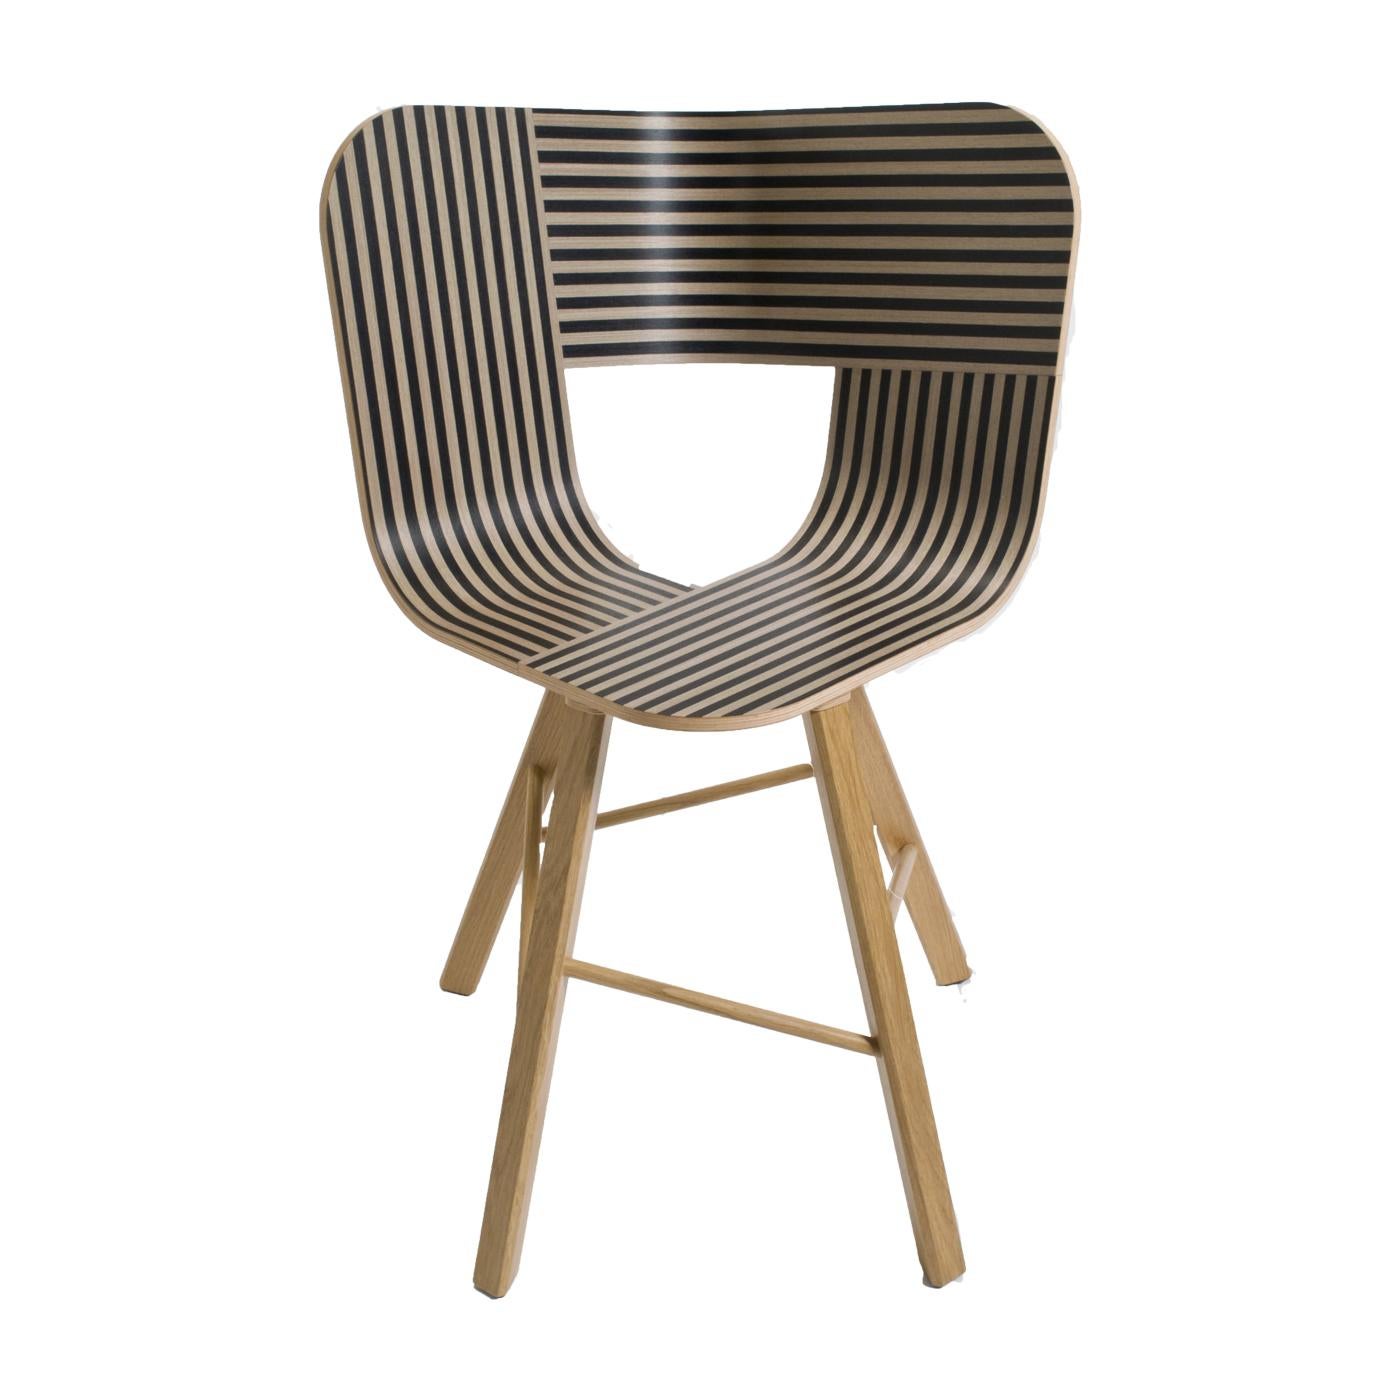 Set of 4, Tria wood 4 legs chair, striped seat ivory and black by Colé Italia with Lorenz & Kaz
Dimensions: H 82.5, D 52, W 61 cm
Materials: Plywood chair; 4 legs solid oak base

Also available: Tria; 3 legs, with cussion, black, gold, simple,